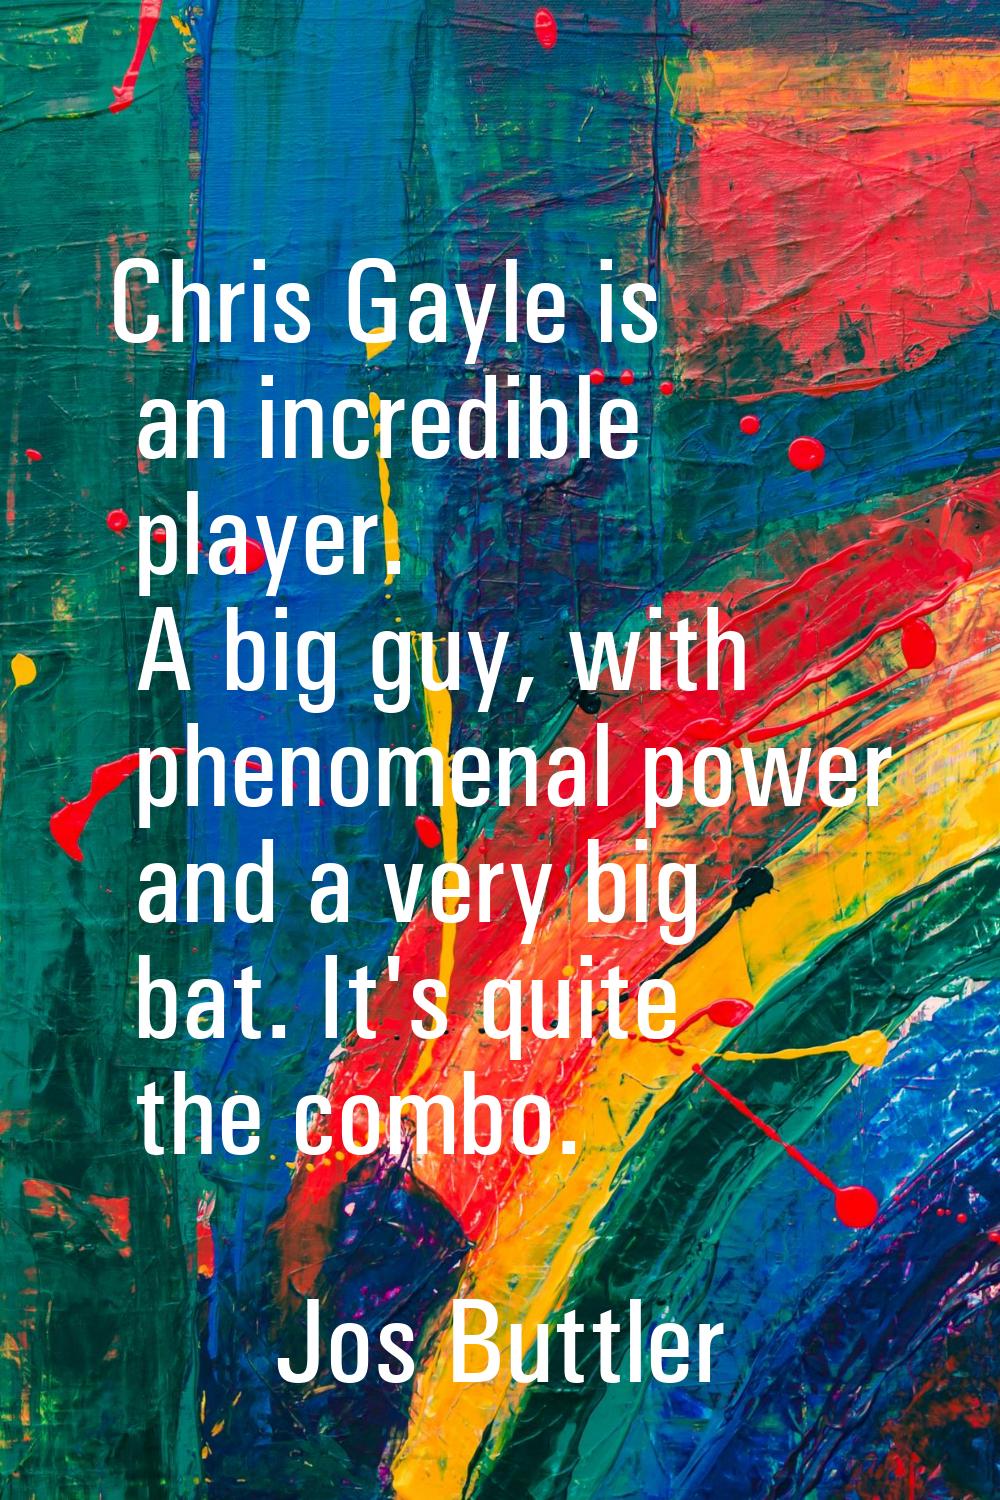 Chris Gayle is an incredible player. A big guy, with phenomenal power and a very big bat. It's quit